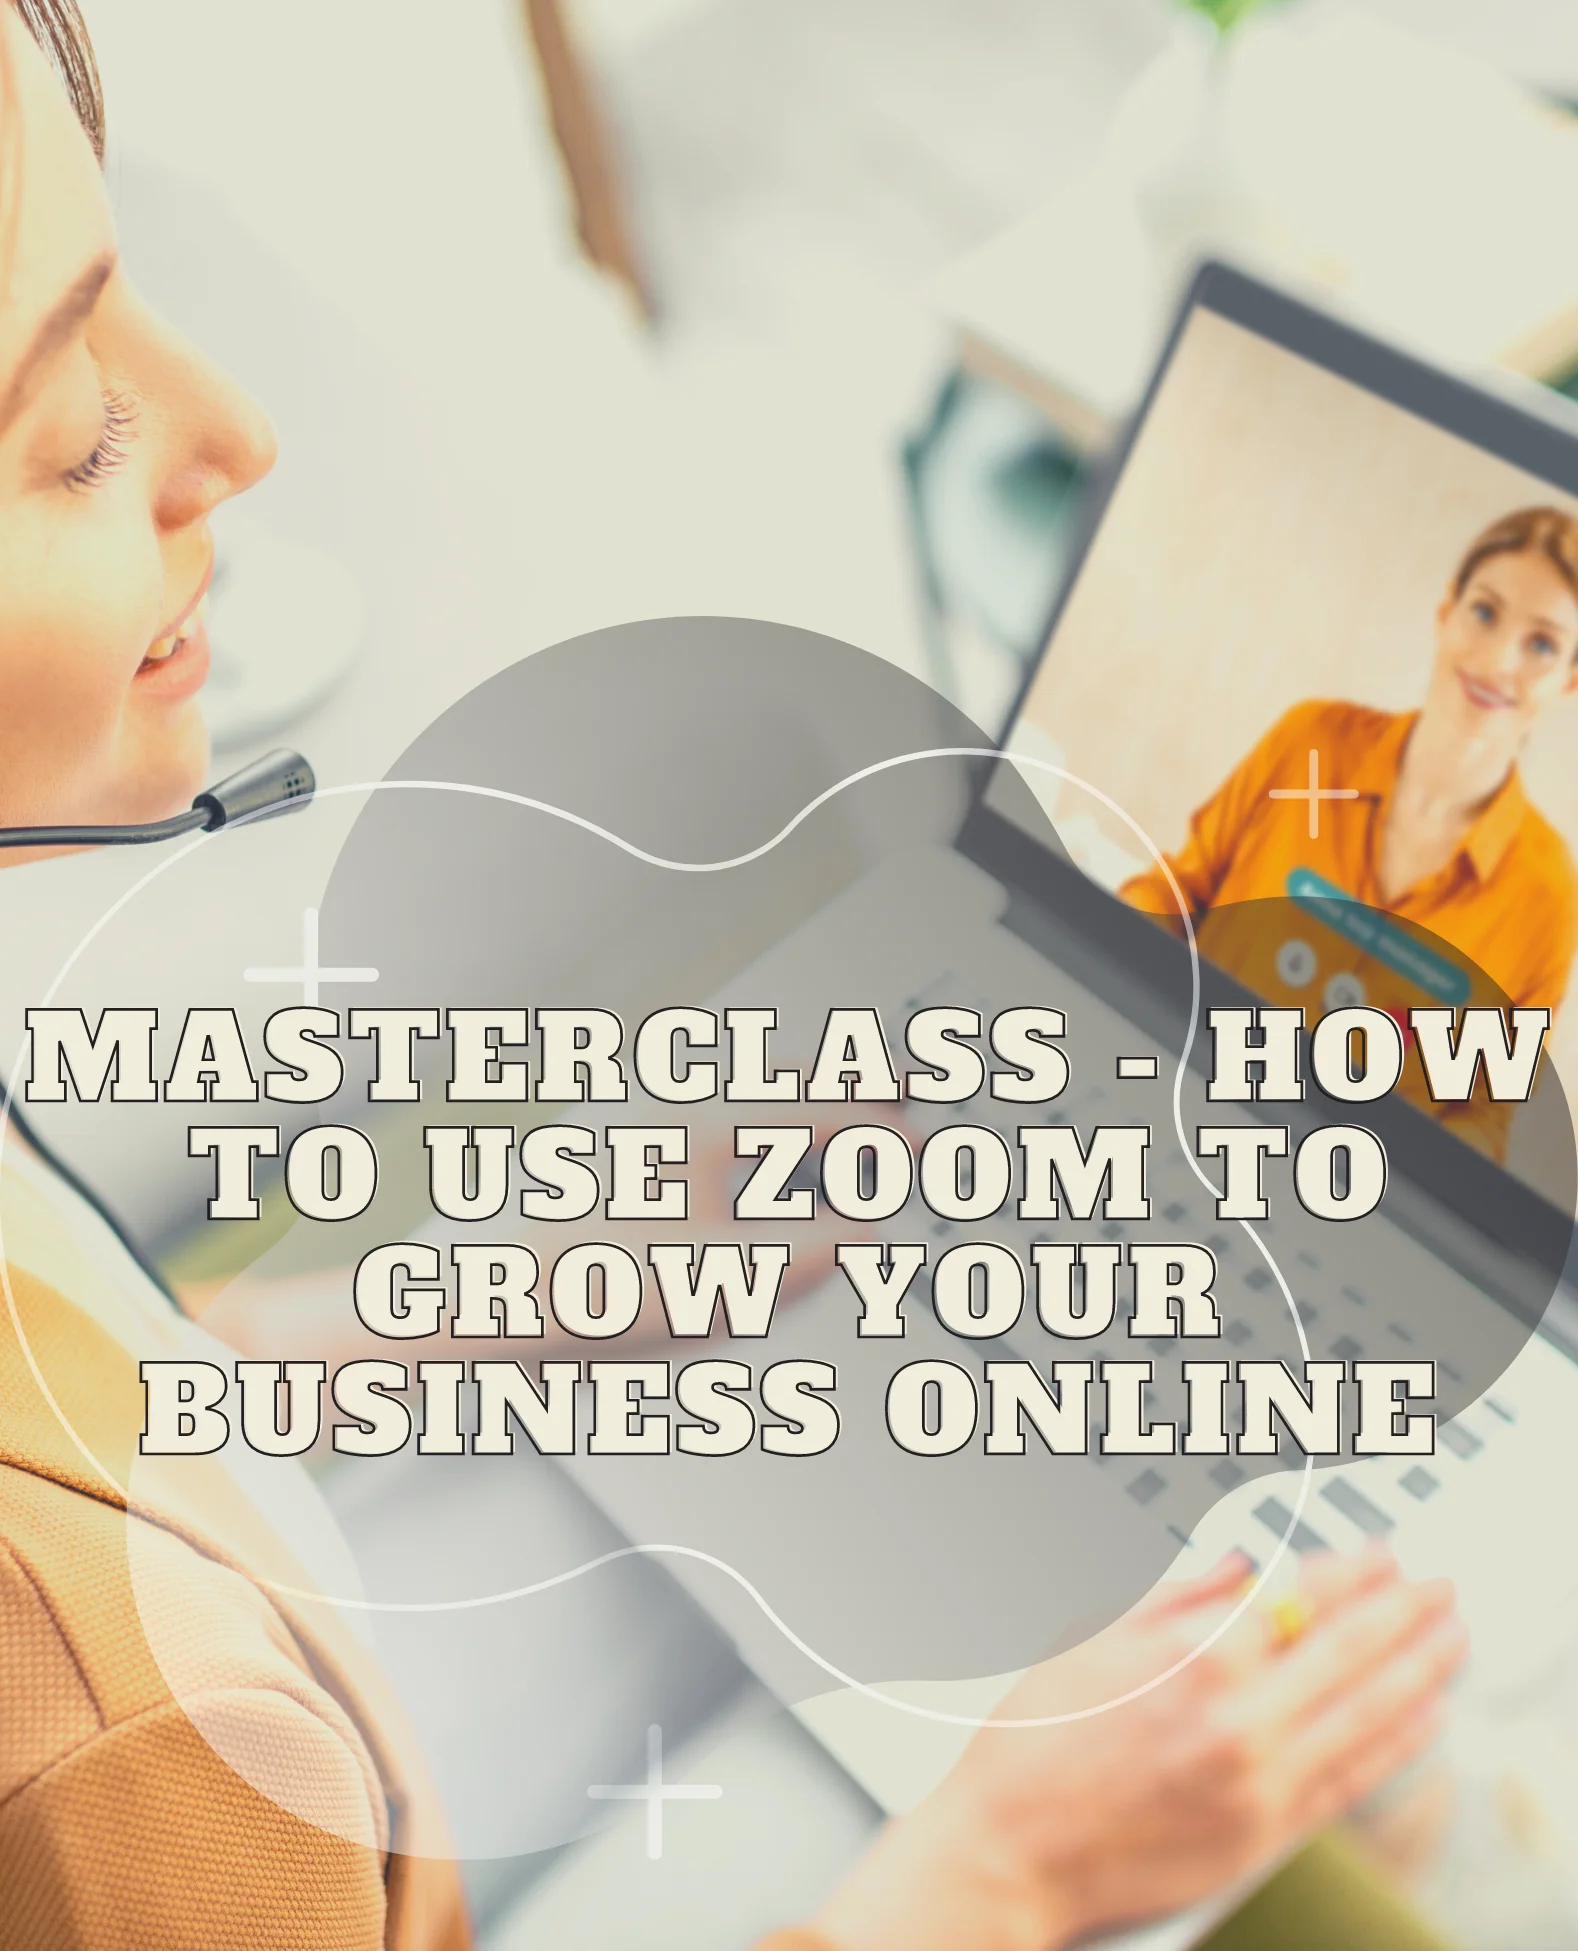 MasterClass - How to Use Zoom to Grow Your Business Online